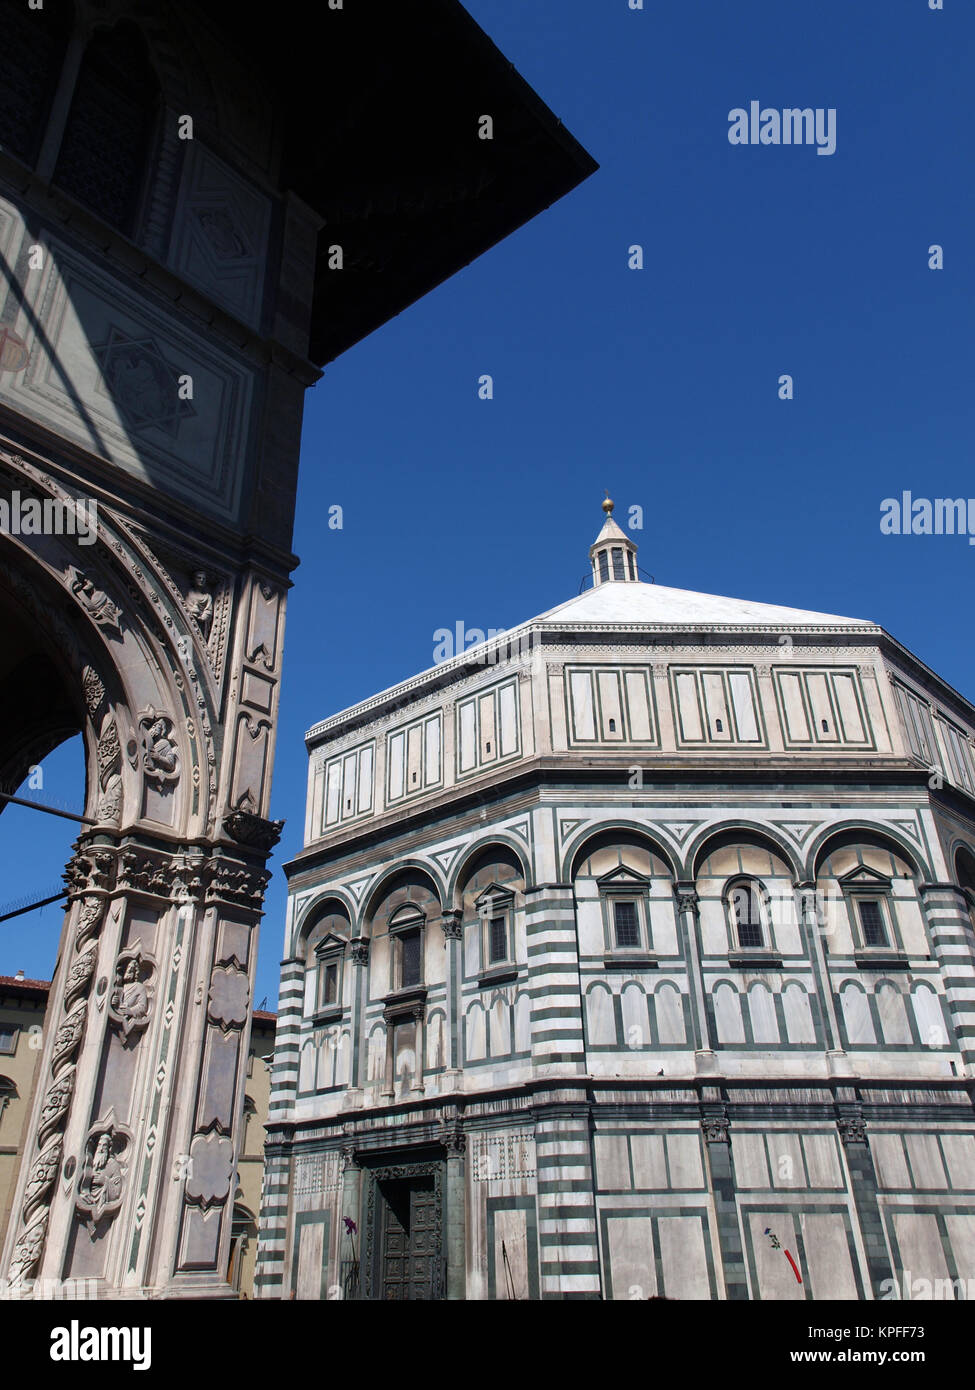 The Baptistery of San Giovanni in Florence Italy. The florence octagonal baptistery of st john is one of the city's oldest buildings built in romanesq Stock Photo